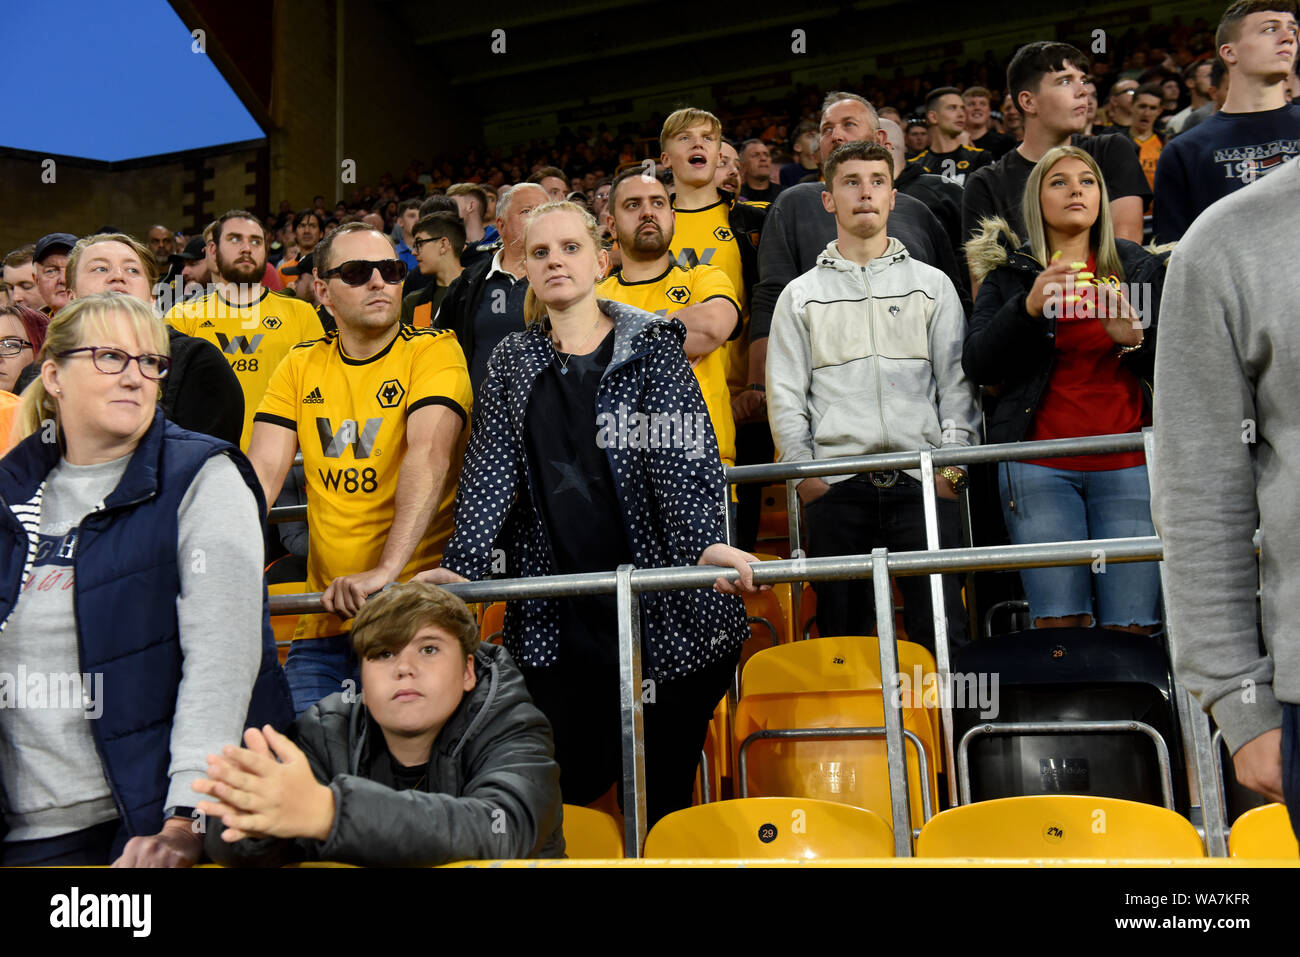 Football supporters using safe standing seats at Molineux Football Stadium home of Wolverhampton Wanderers FC. Stock Photo